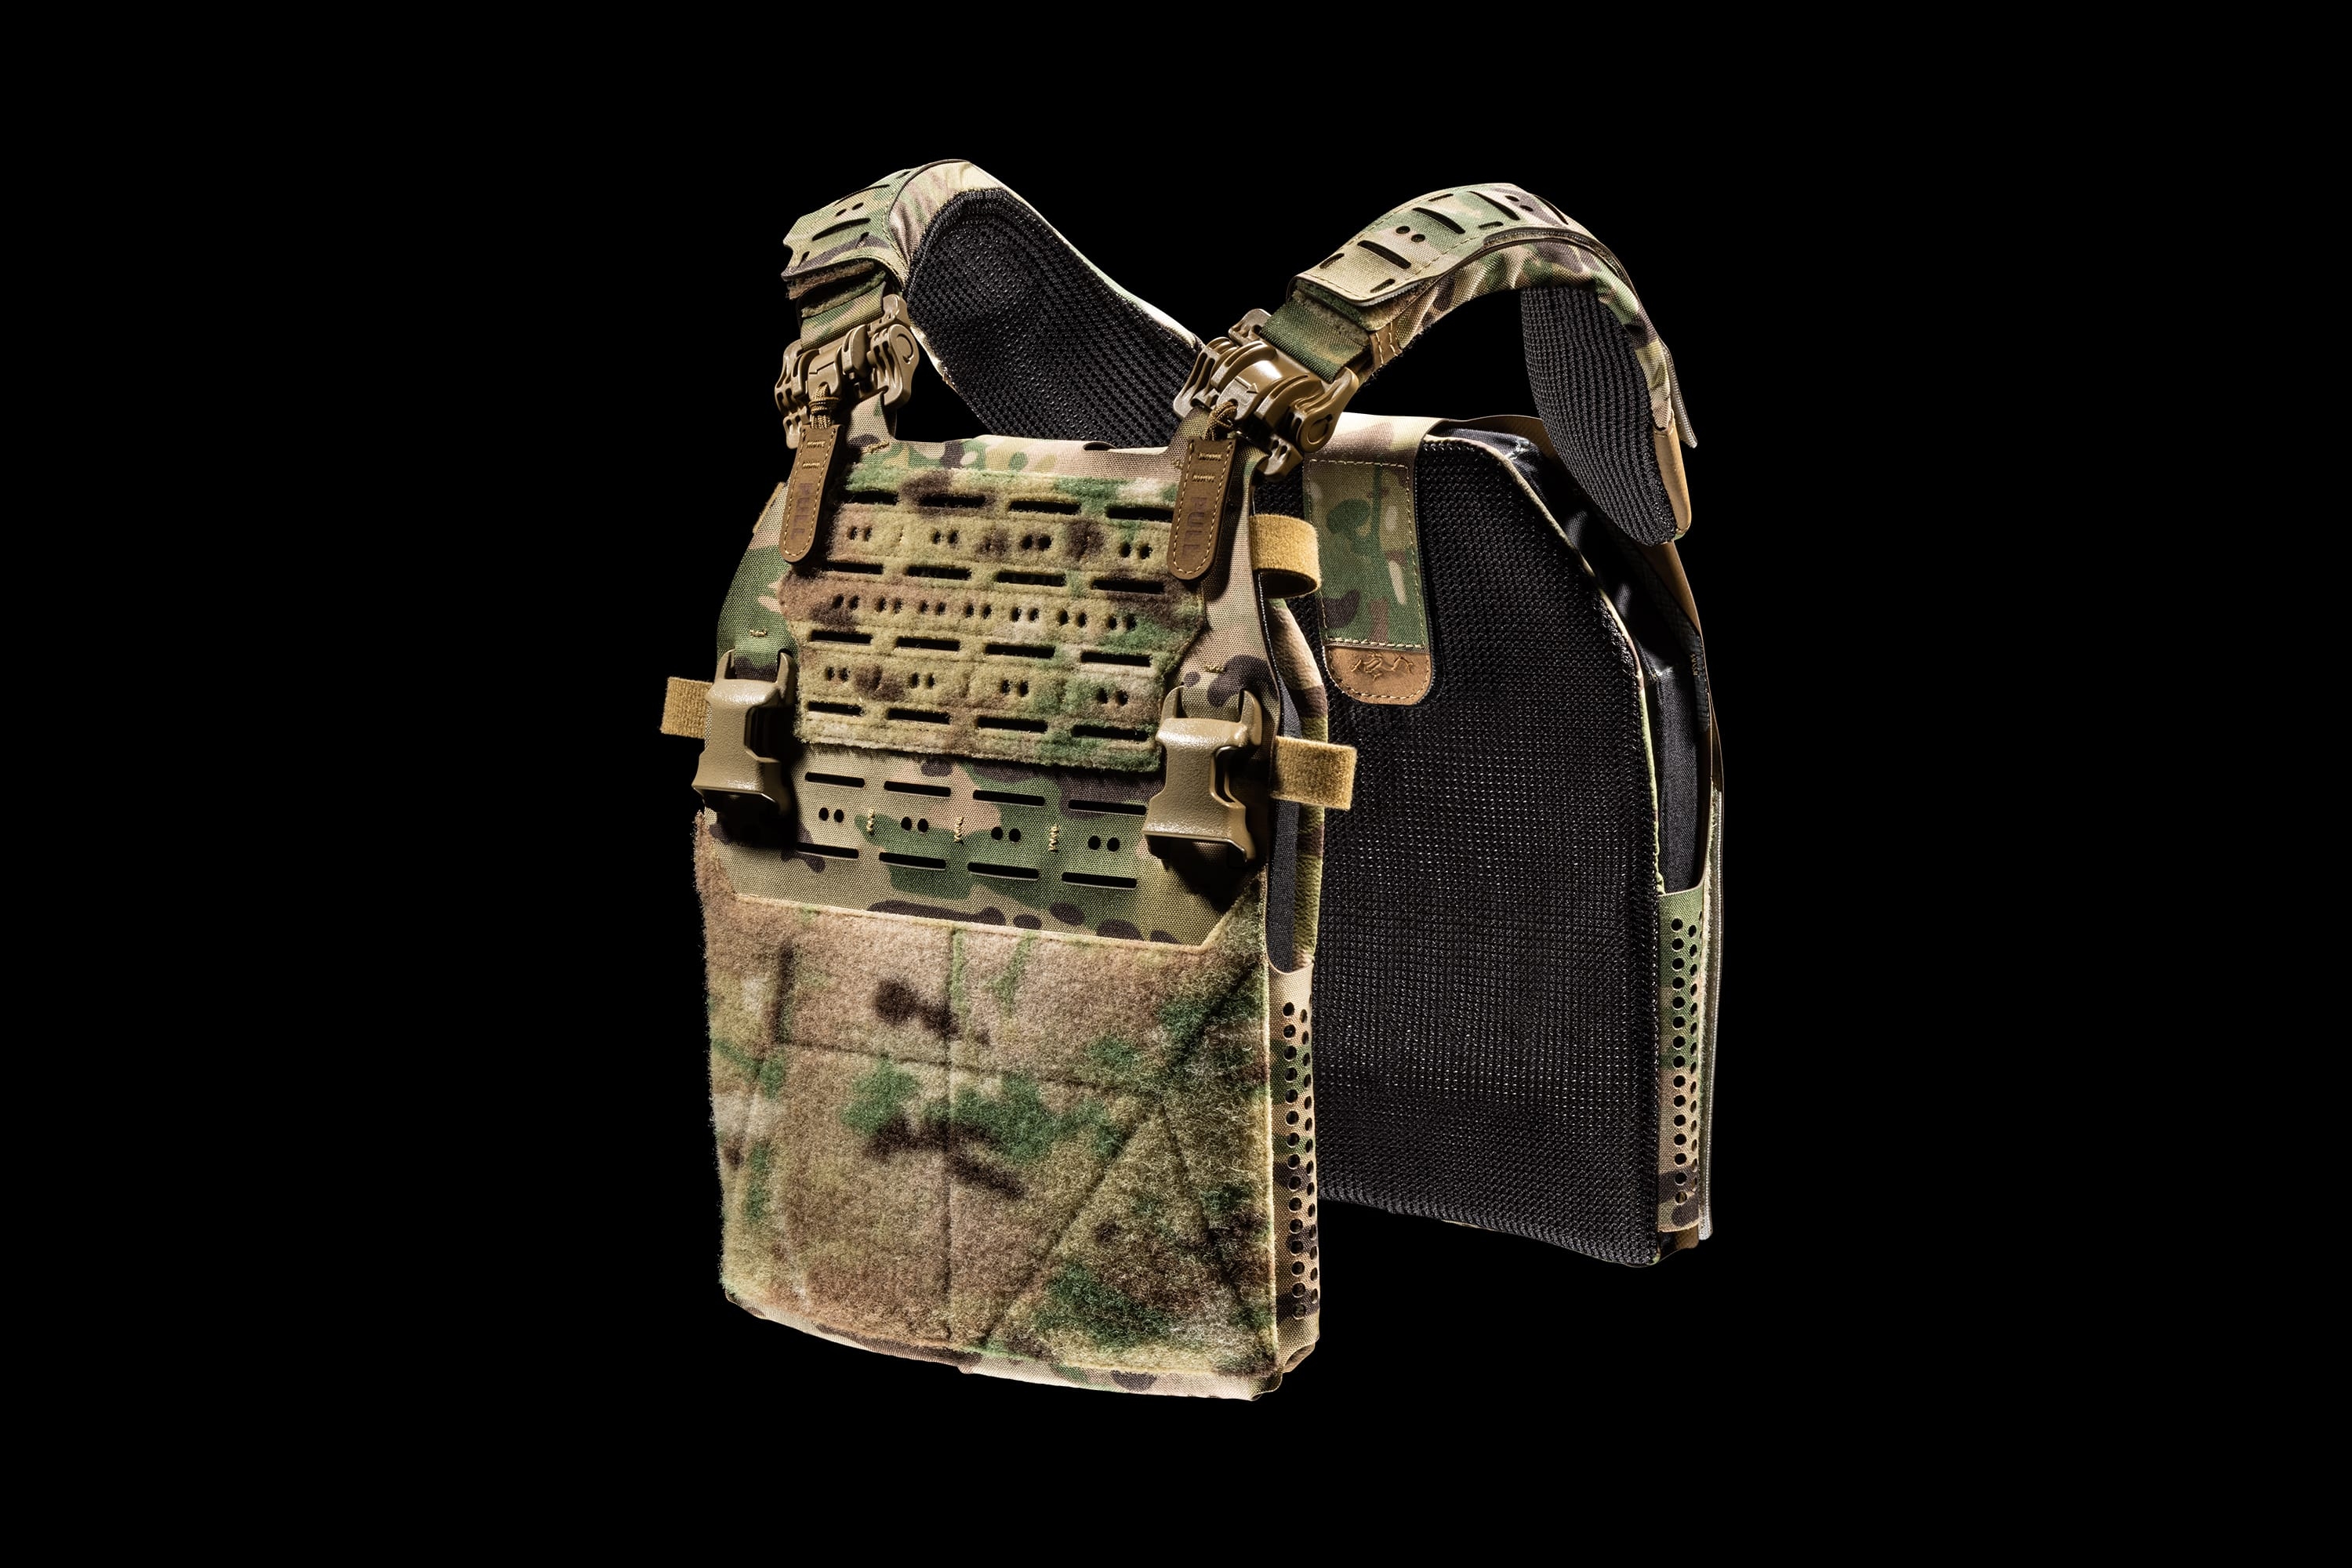 HAWK Plate Carrier front and back